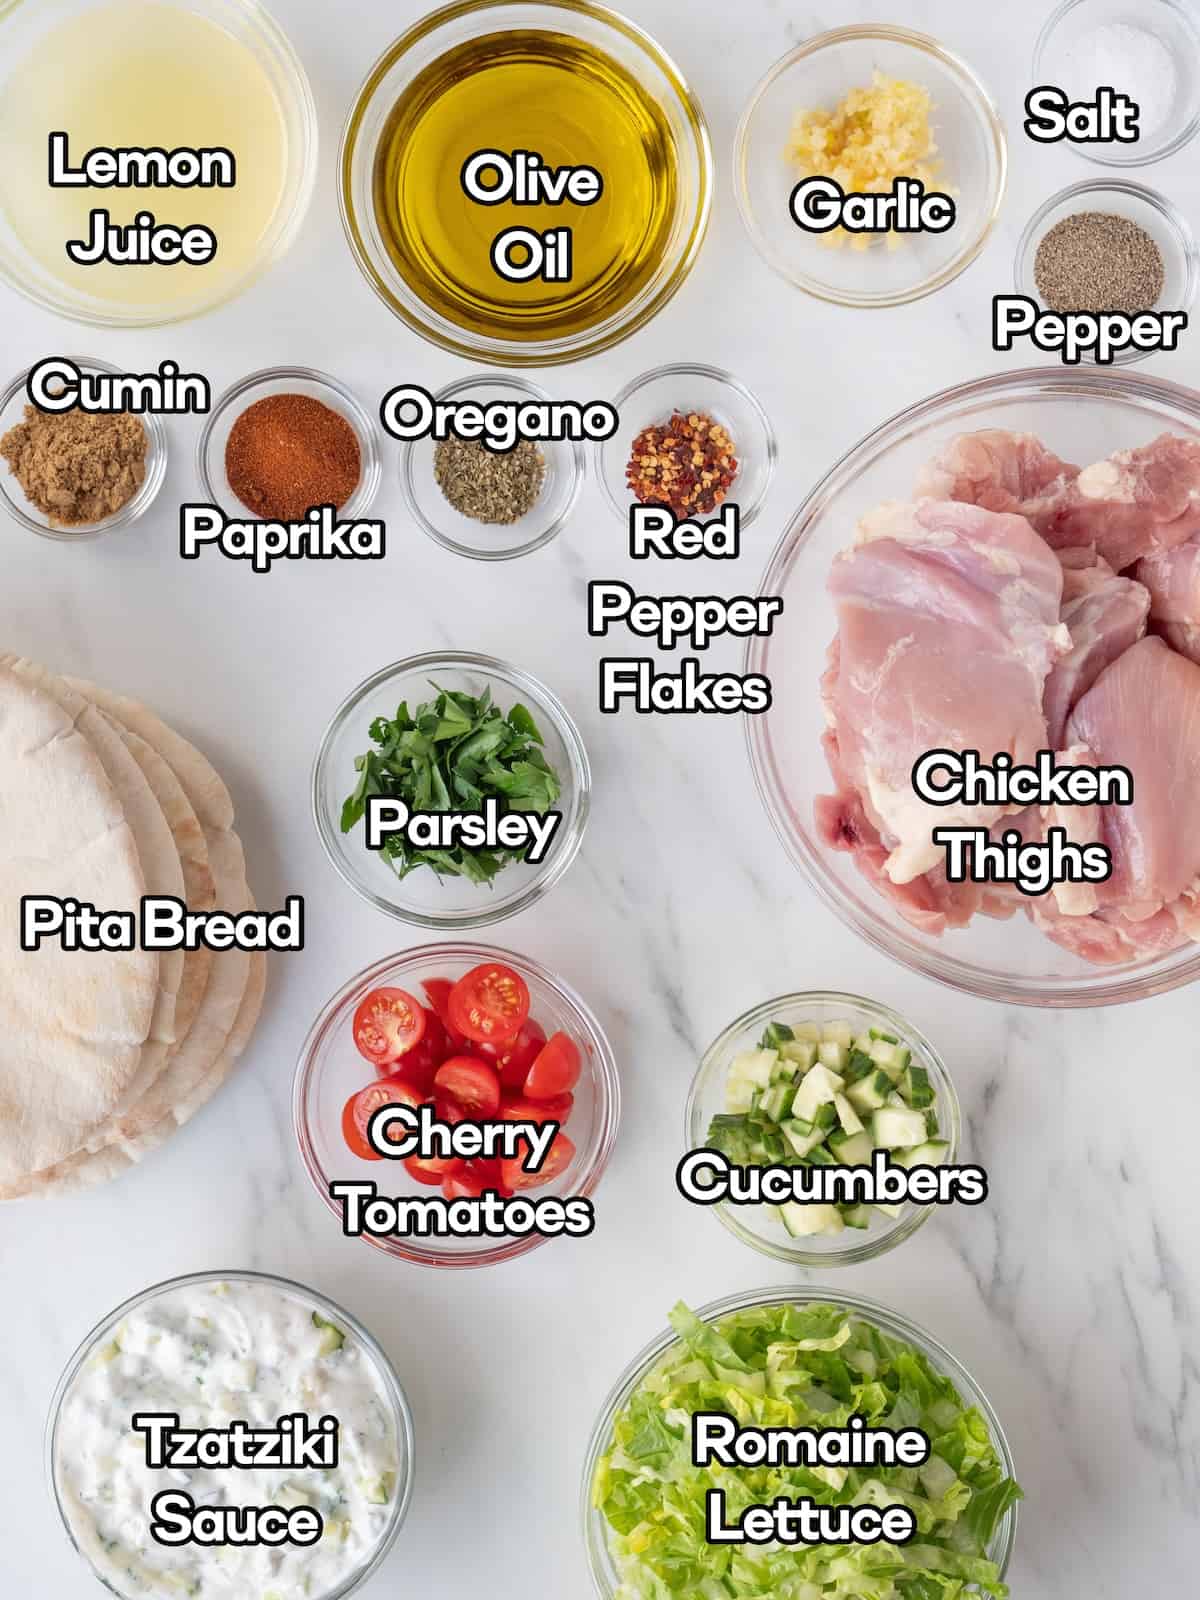 Mise-en-place of all the ingredients to make chicken shawarma stuffed pitas